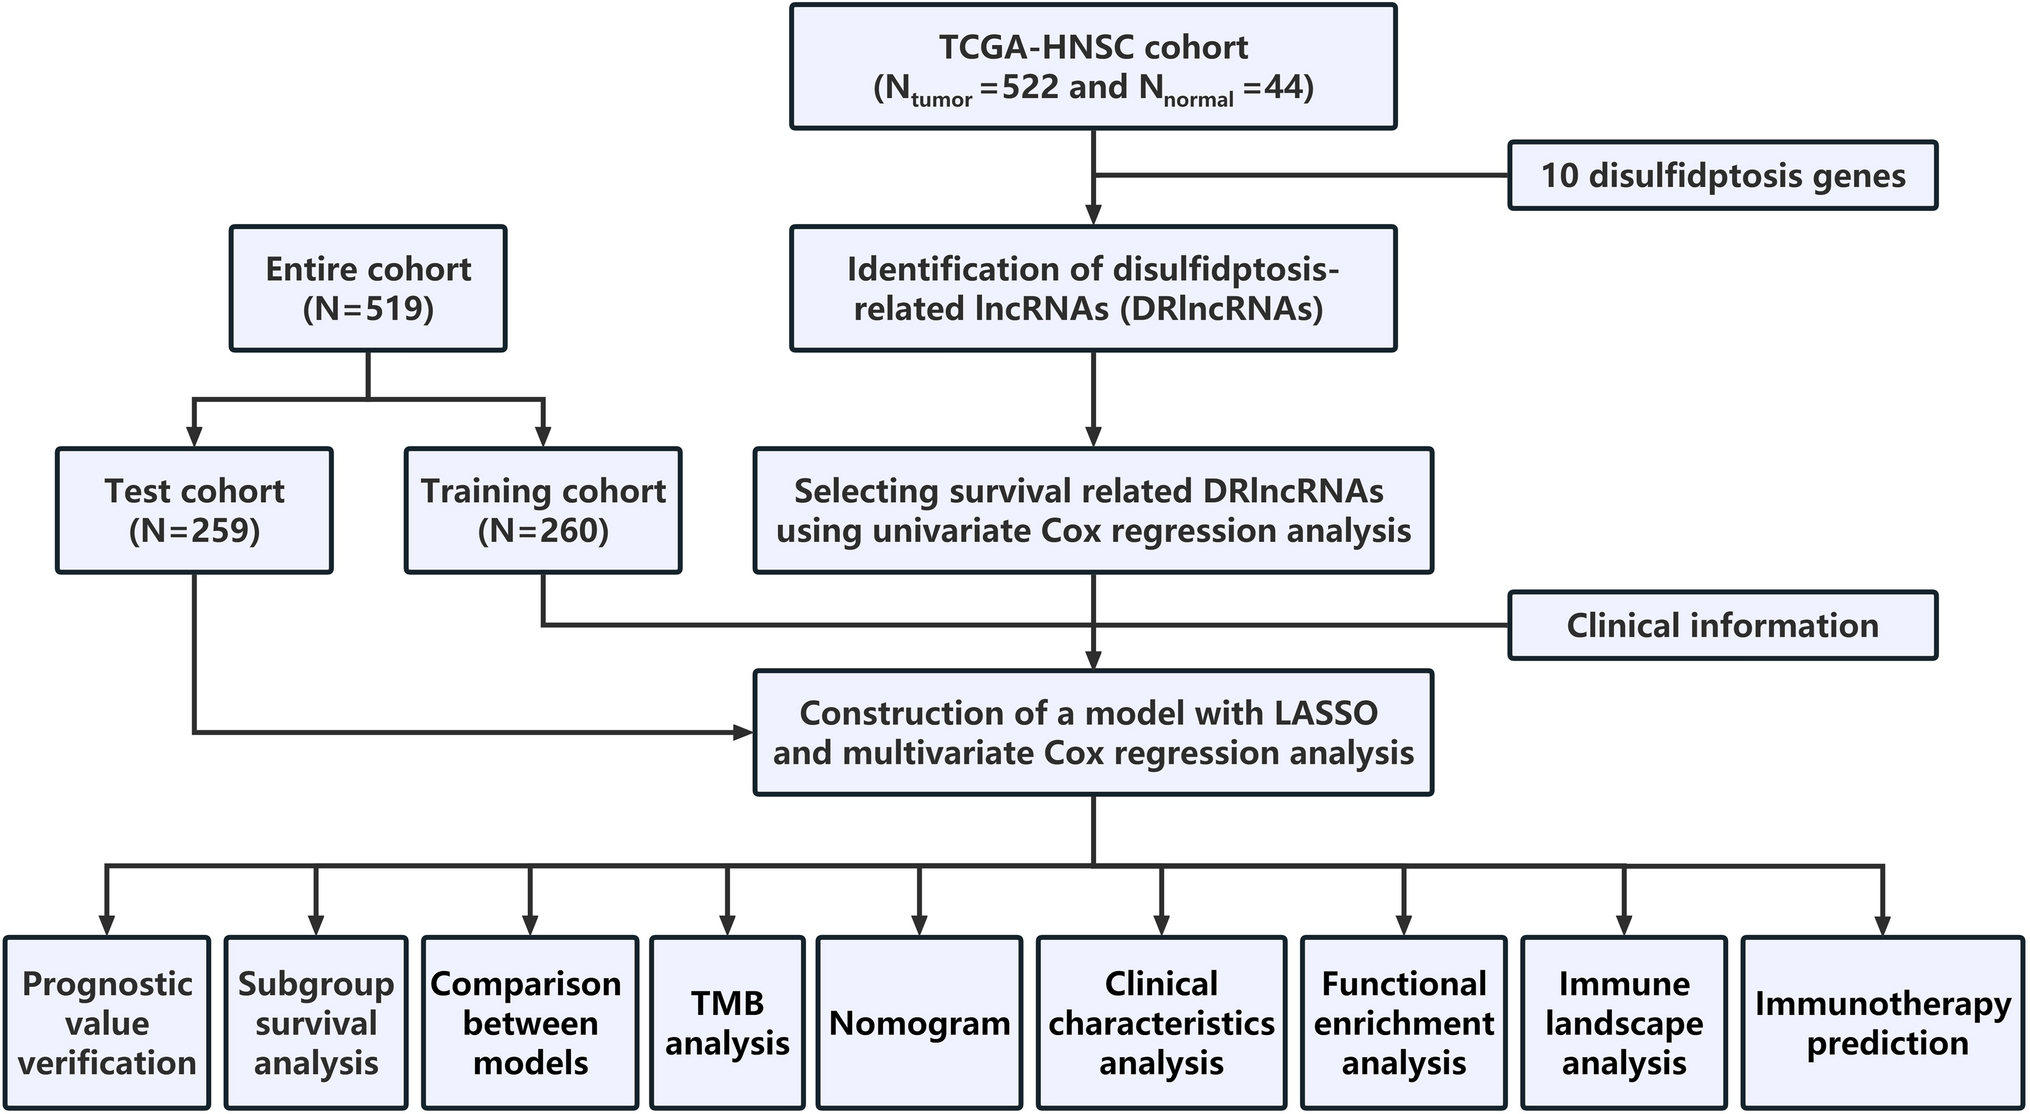 Identification of a disulfidptosis-related lncRNA signature for the prognostic and immune landscape prediction in head and neck squamous cell carcinoma